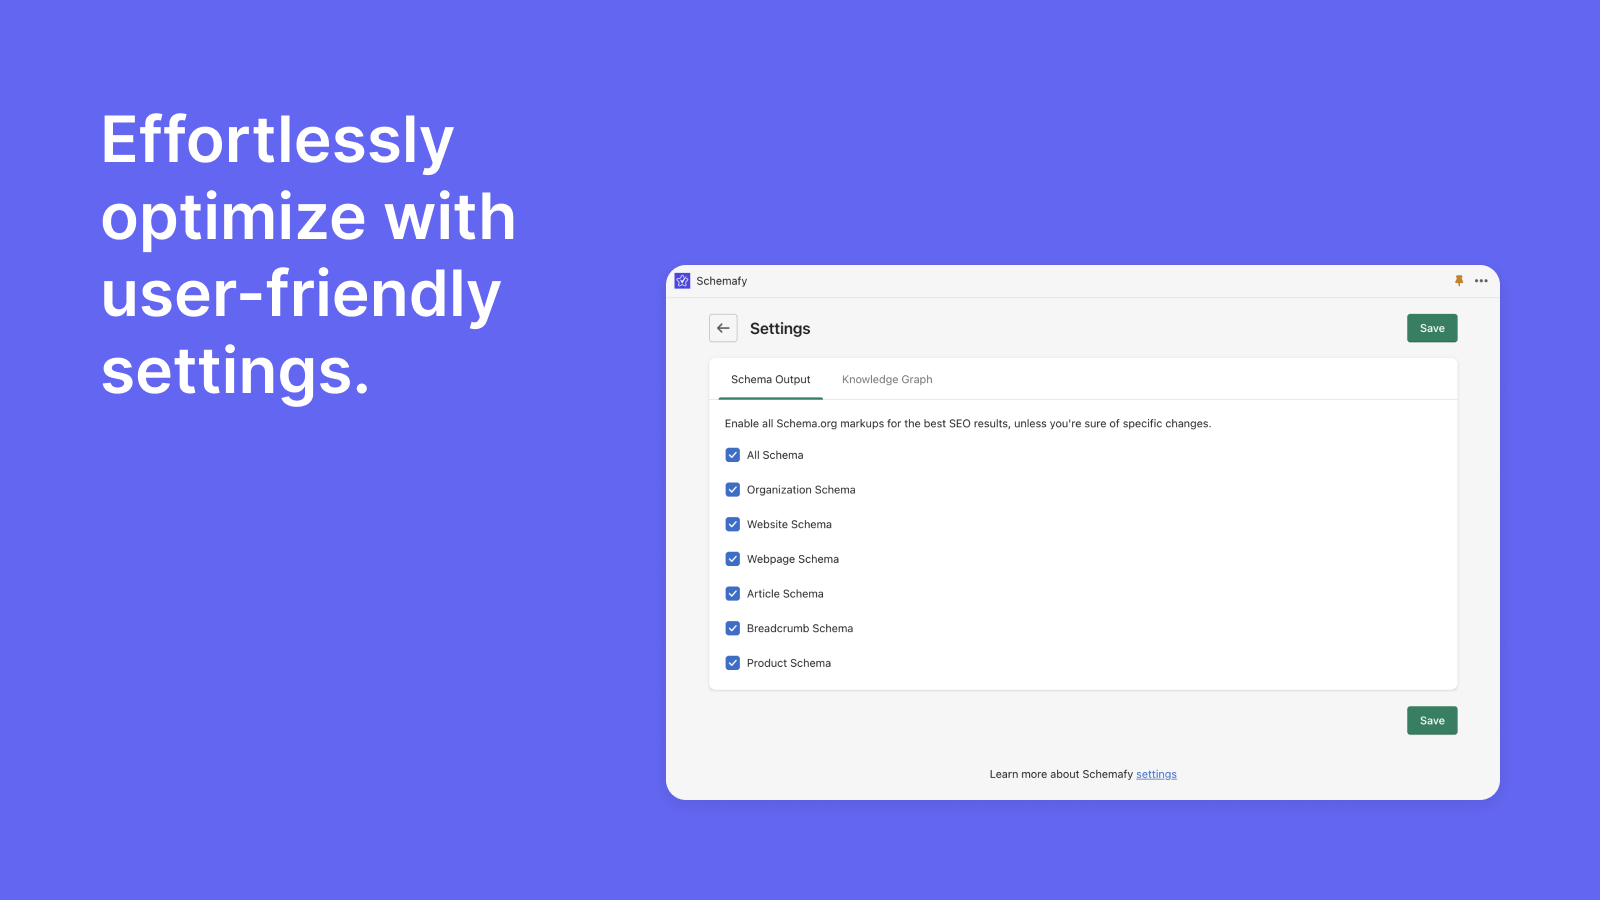 Effortlessly optimize with user-friendly settings.